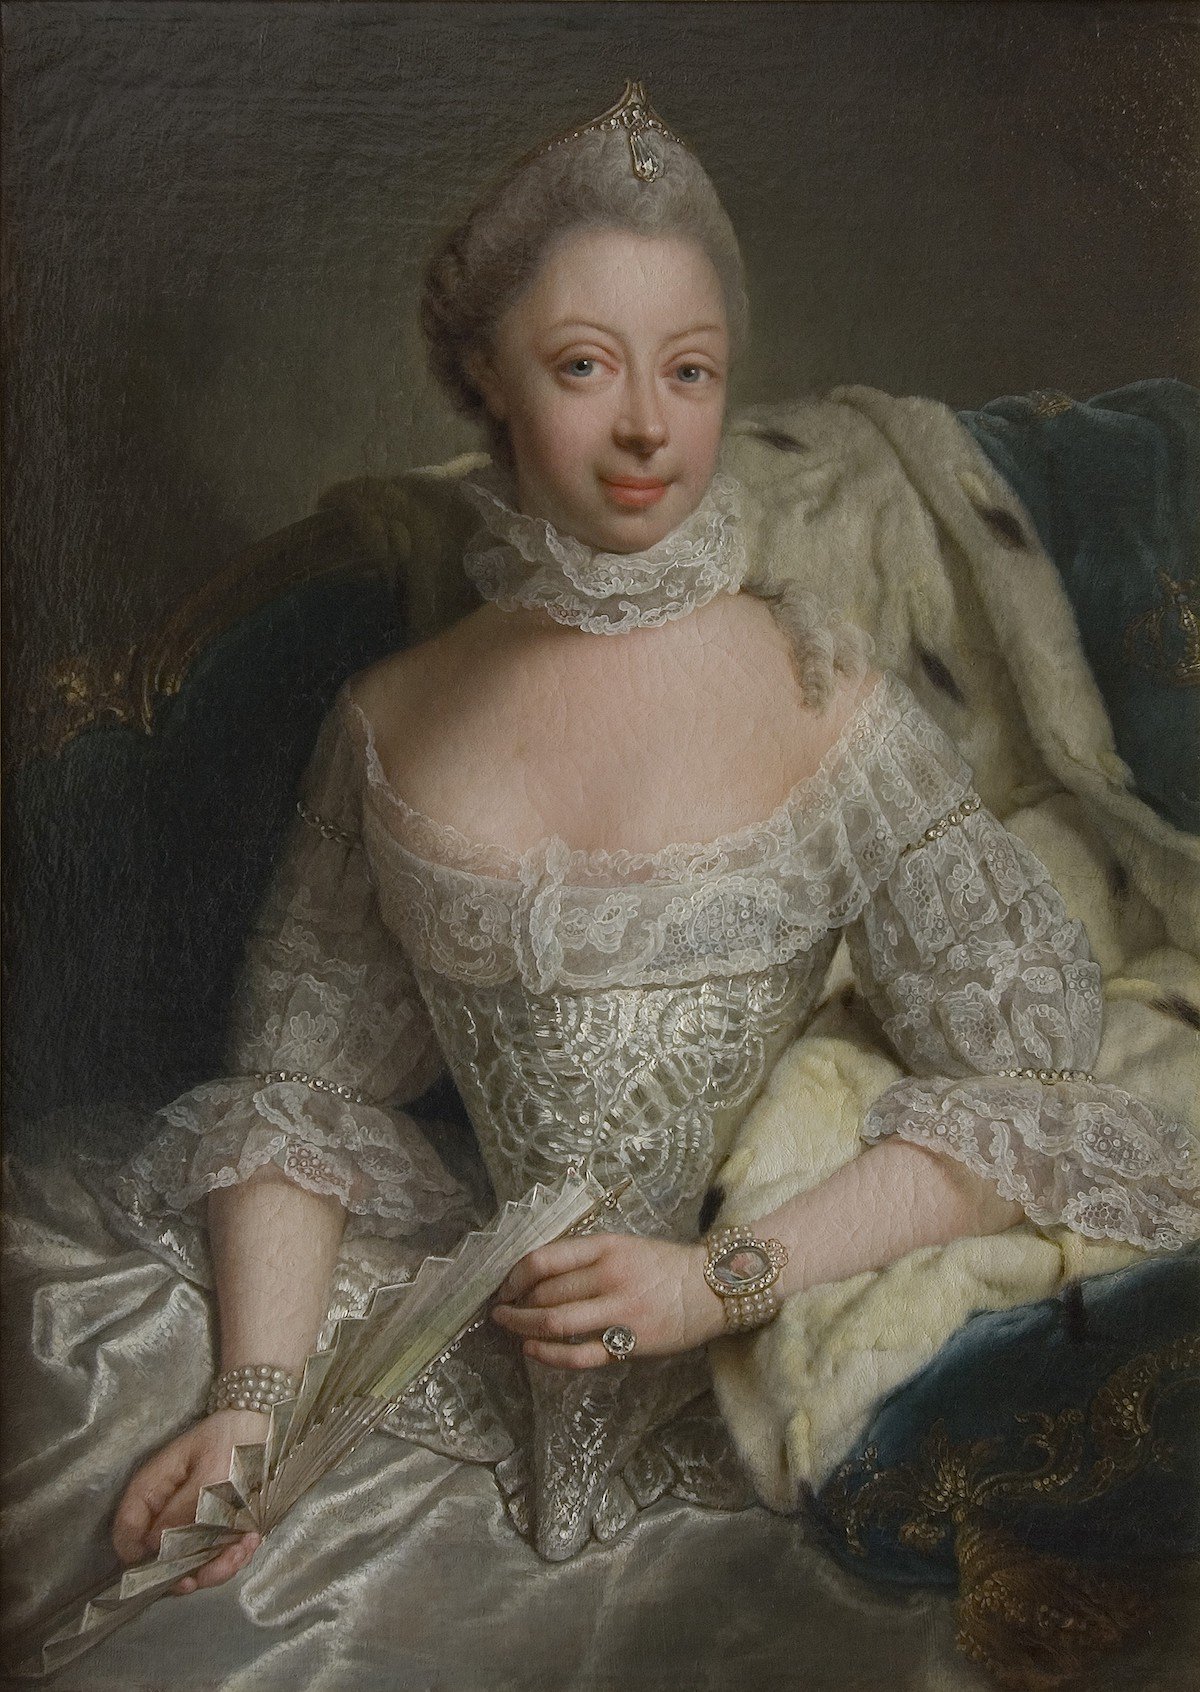 Queen Charlotta, Sofia Charlotta, 1744-1818, Princess of Mecklenburg-Strelitz, Queen of England | Sepia Times/Universal Images Group via Getty Images